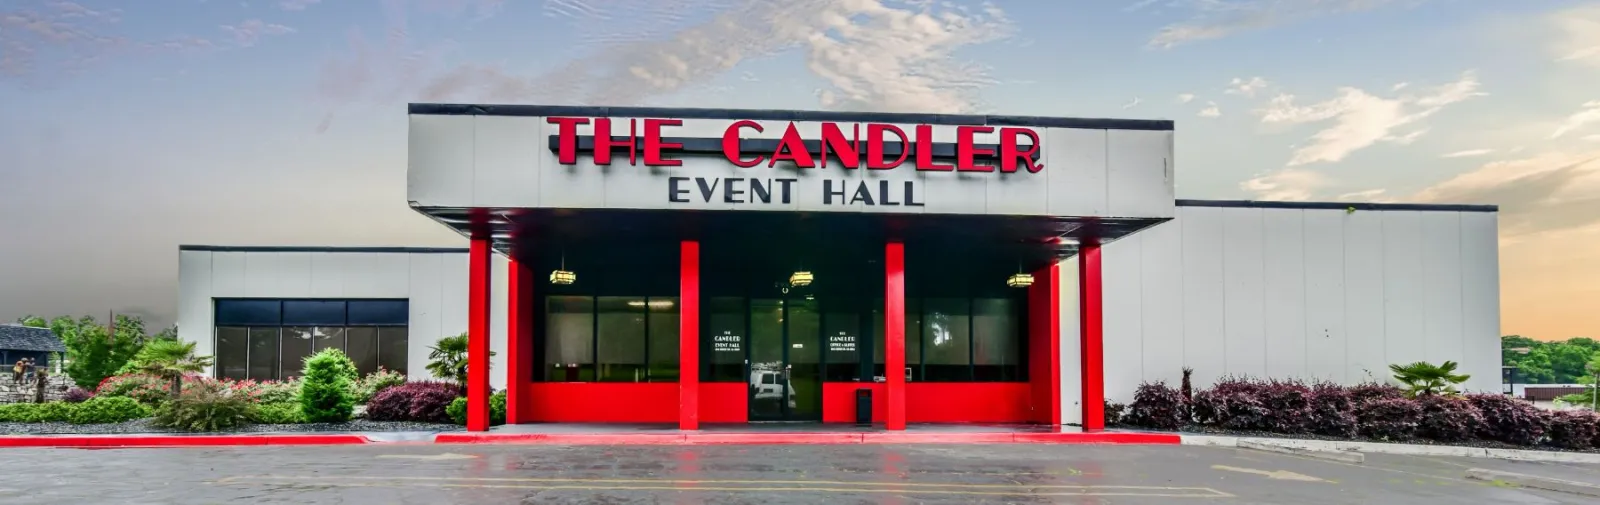 Candler Event Hall